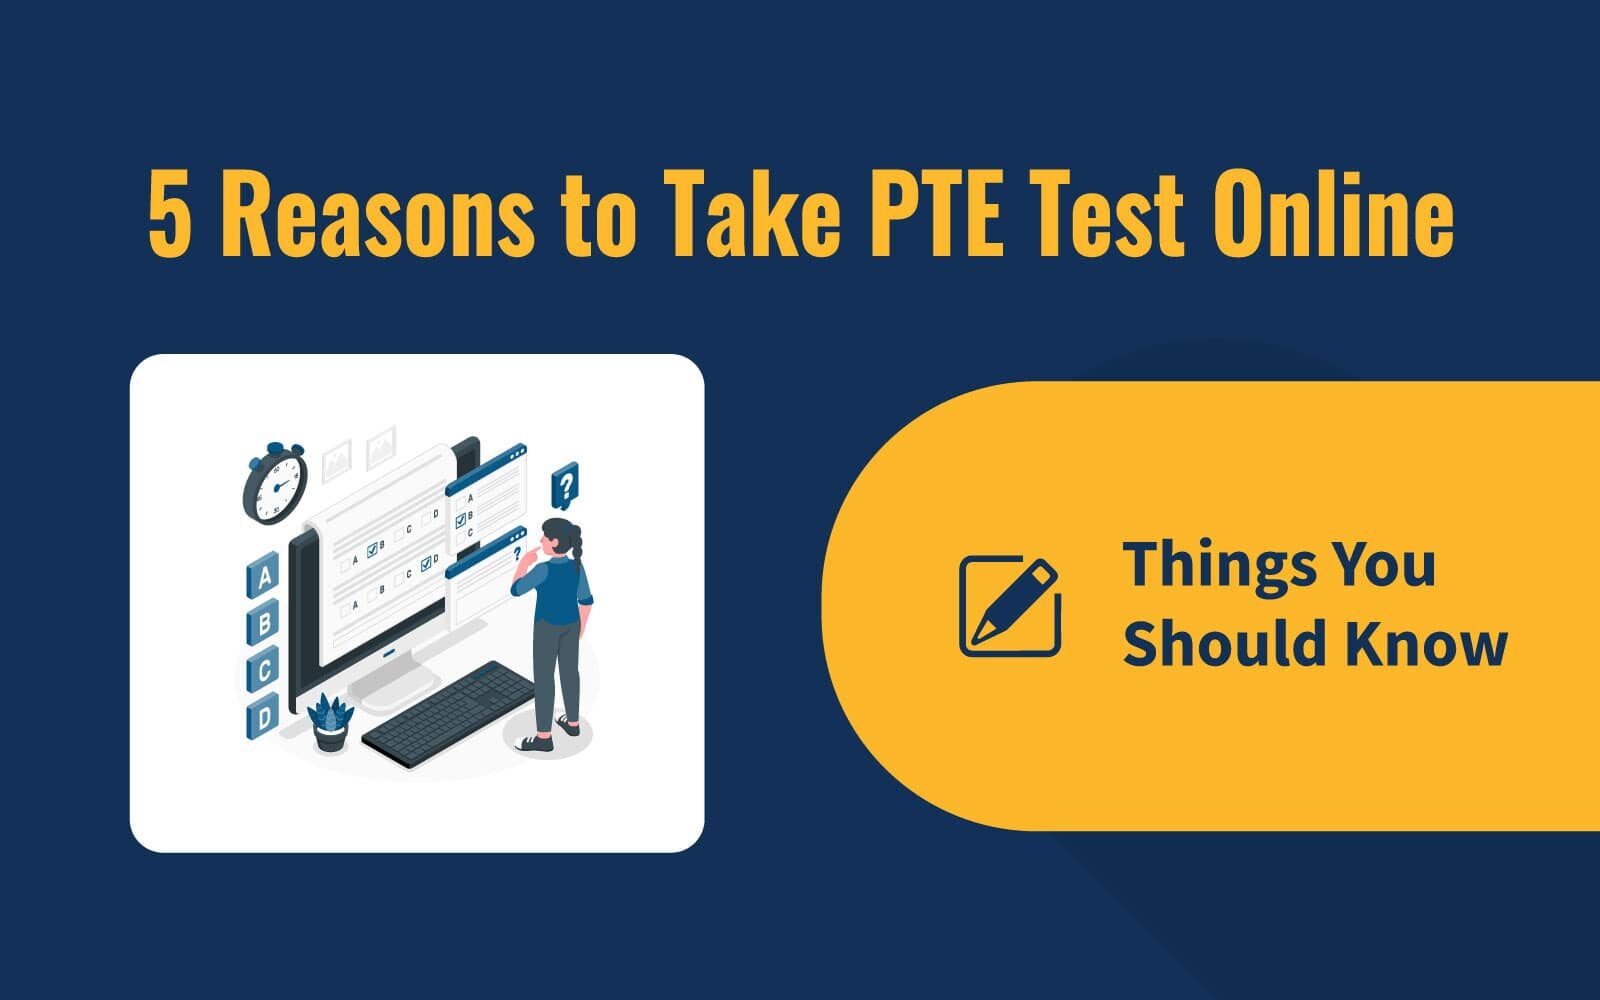 5 Reasons to Take PTE Test Online